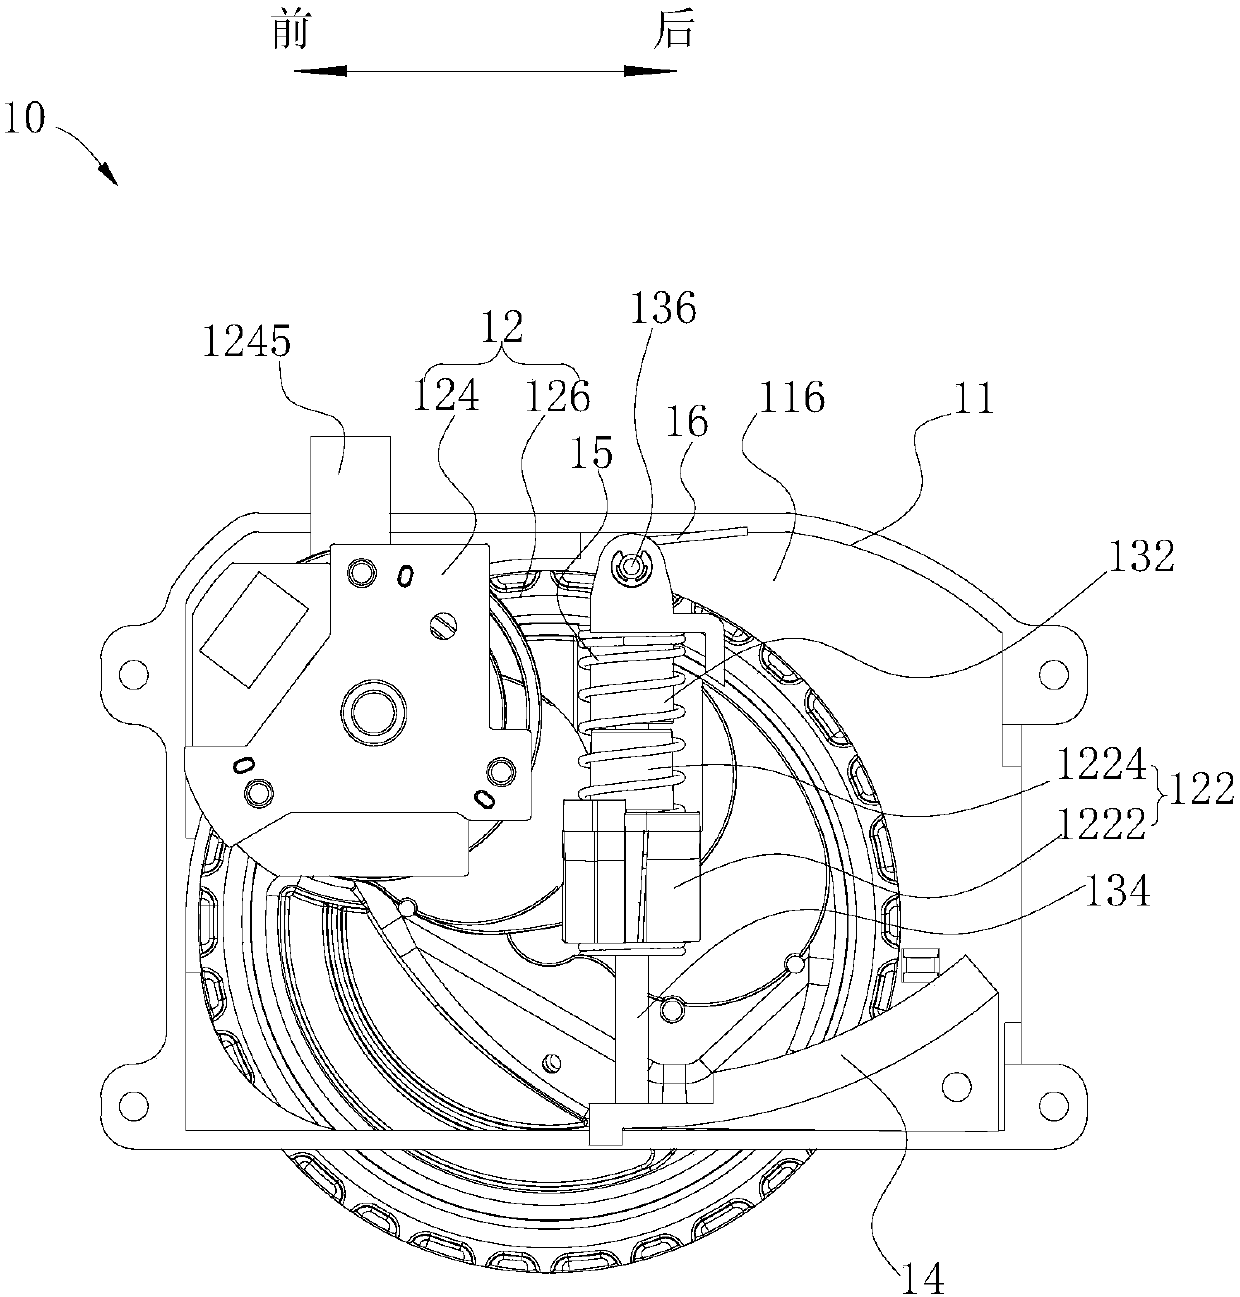 Drive wheel structure and cleaning device